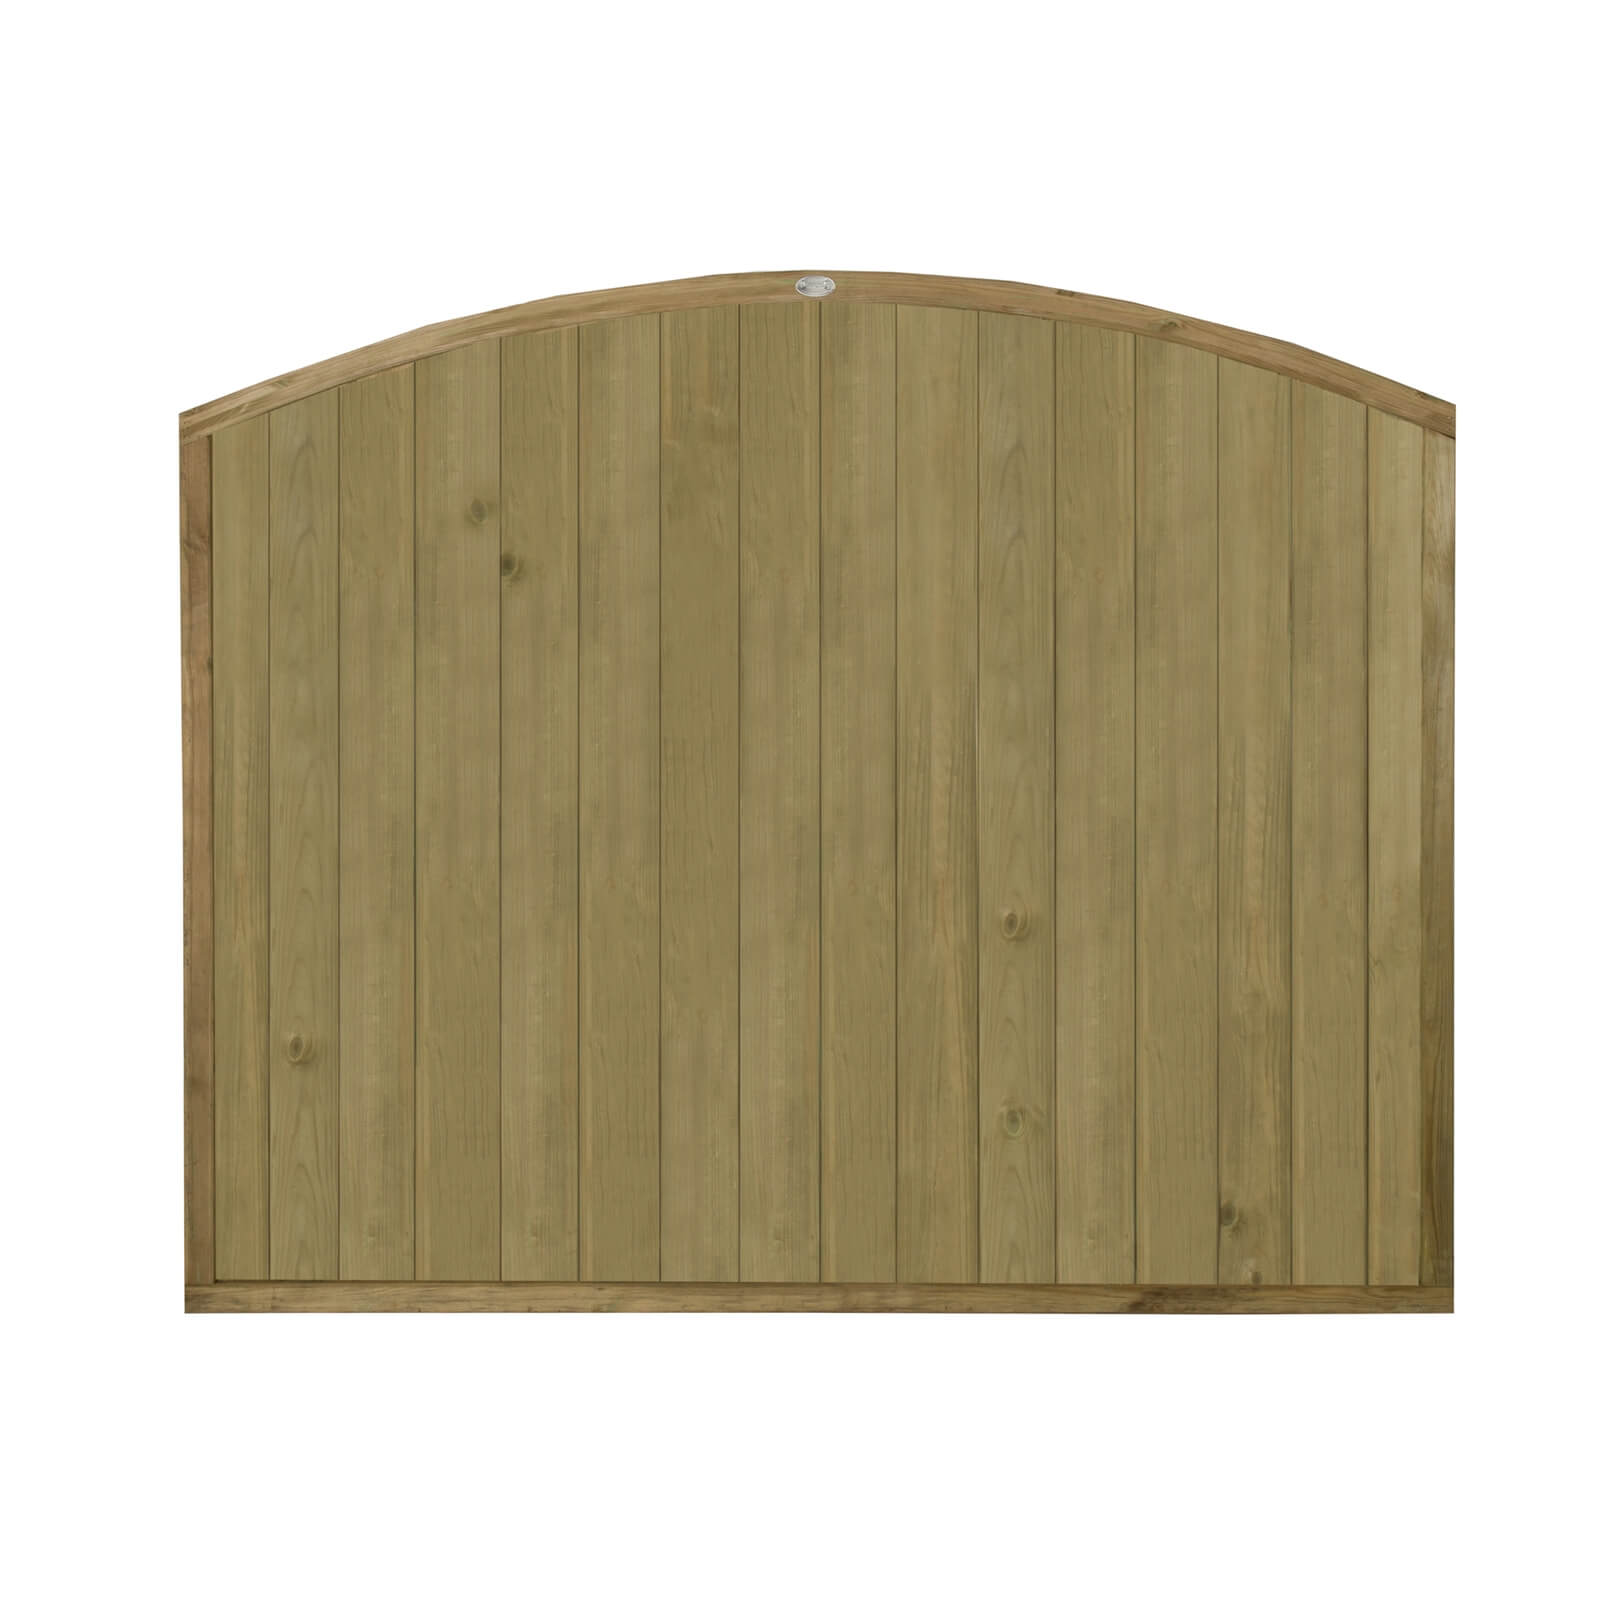 Forest Dome Tongue and Groove Panel - 5ft - Pack of 5